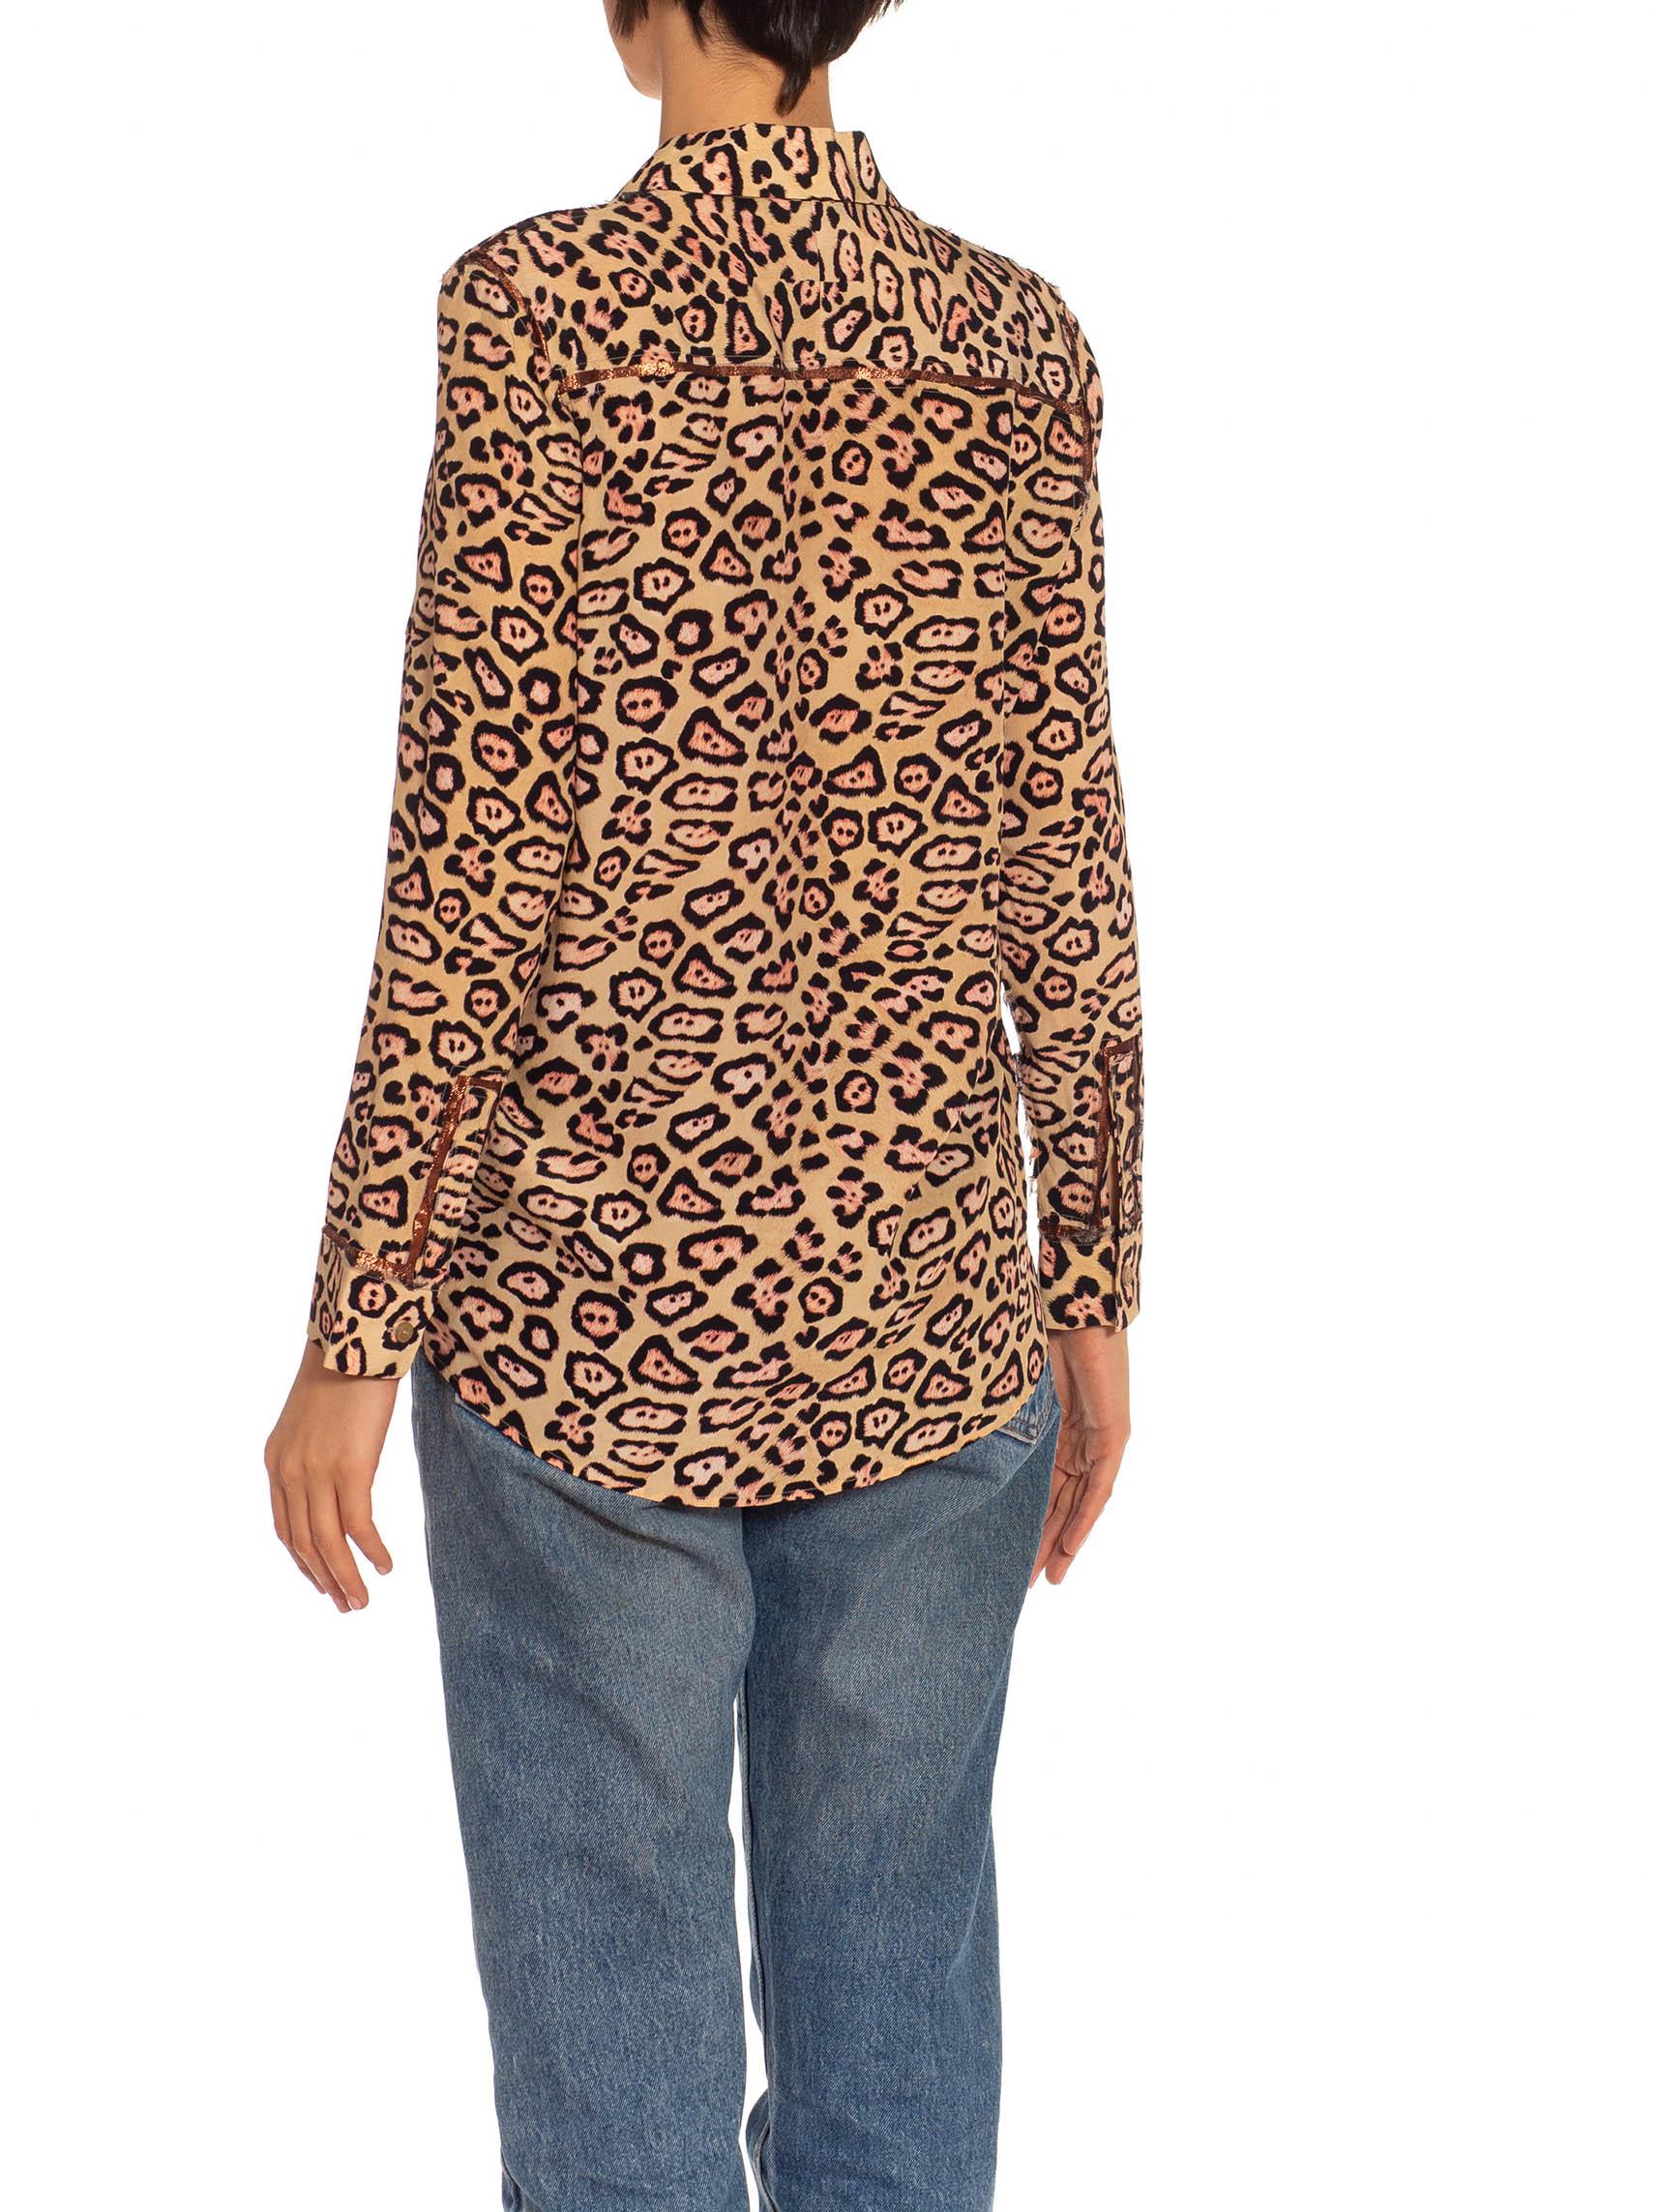 2010S GIVENCHY Leopard Print Tan & Brown Silk With Metallic Trimmings Shirt For Sale 2